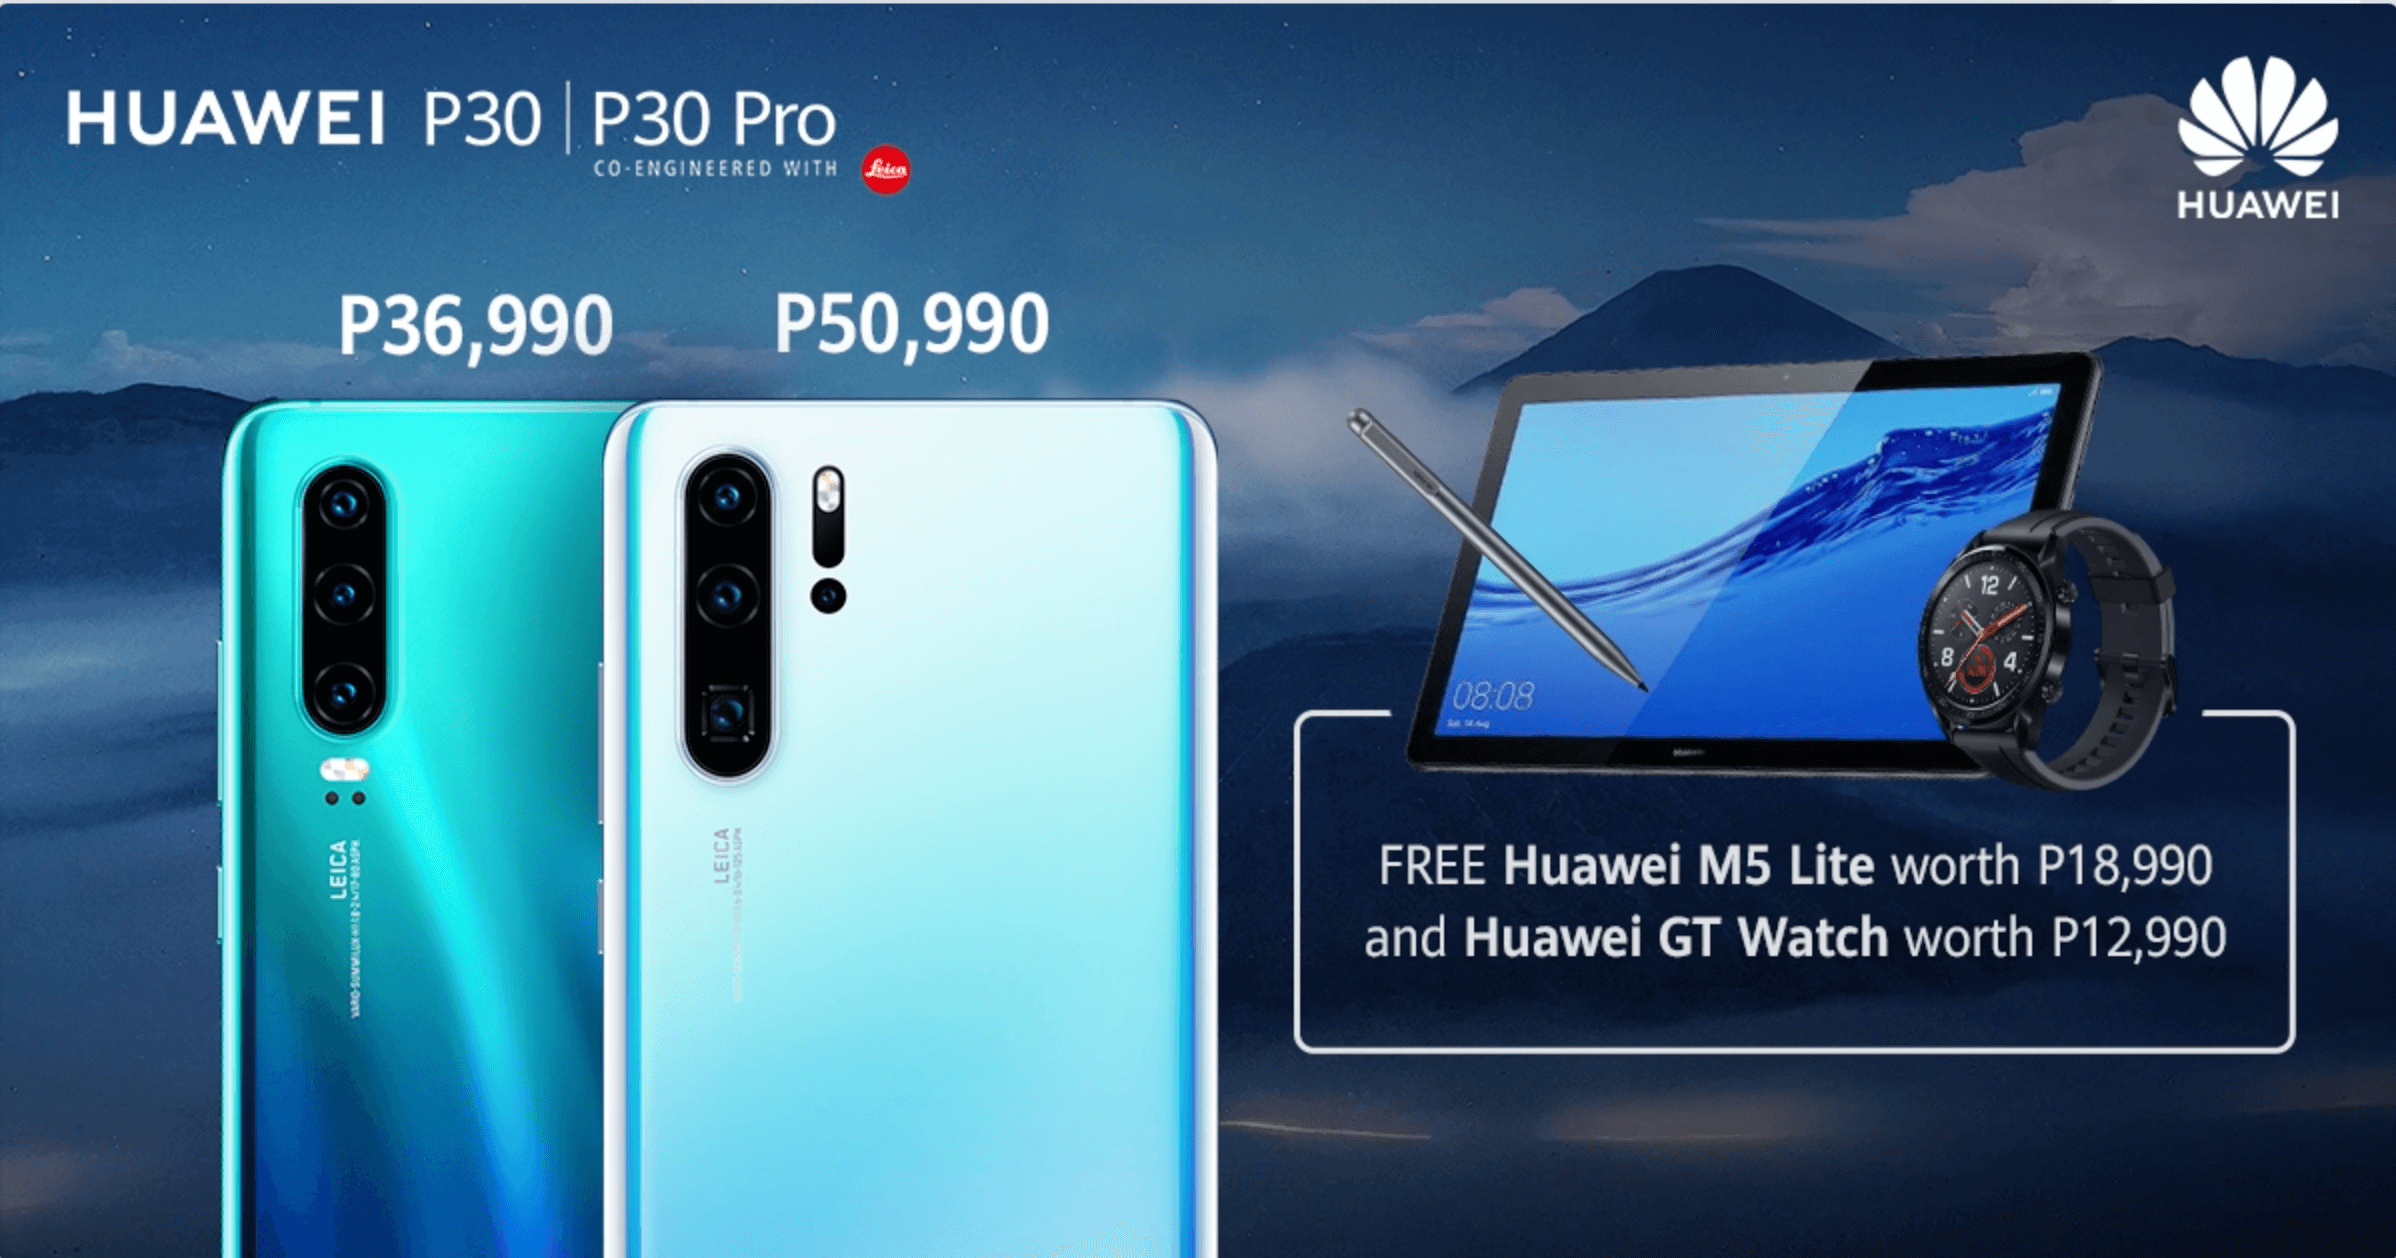 HW P30 and P30 Pro One Day Only Promo at SM Megamall2 2